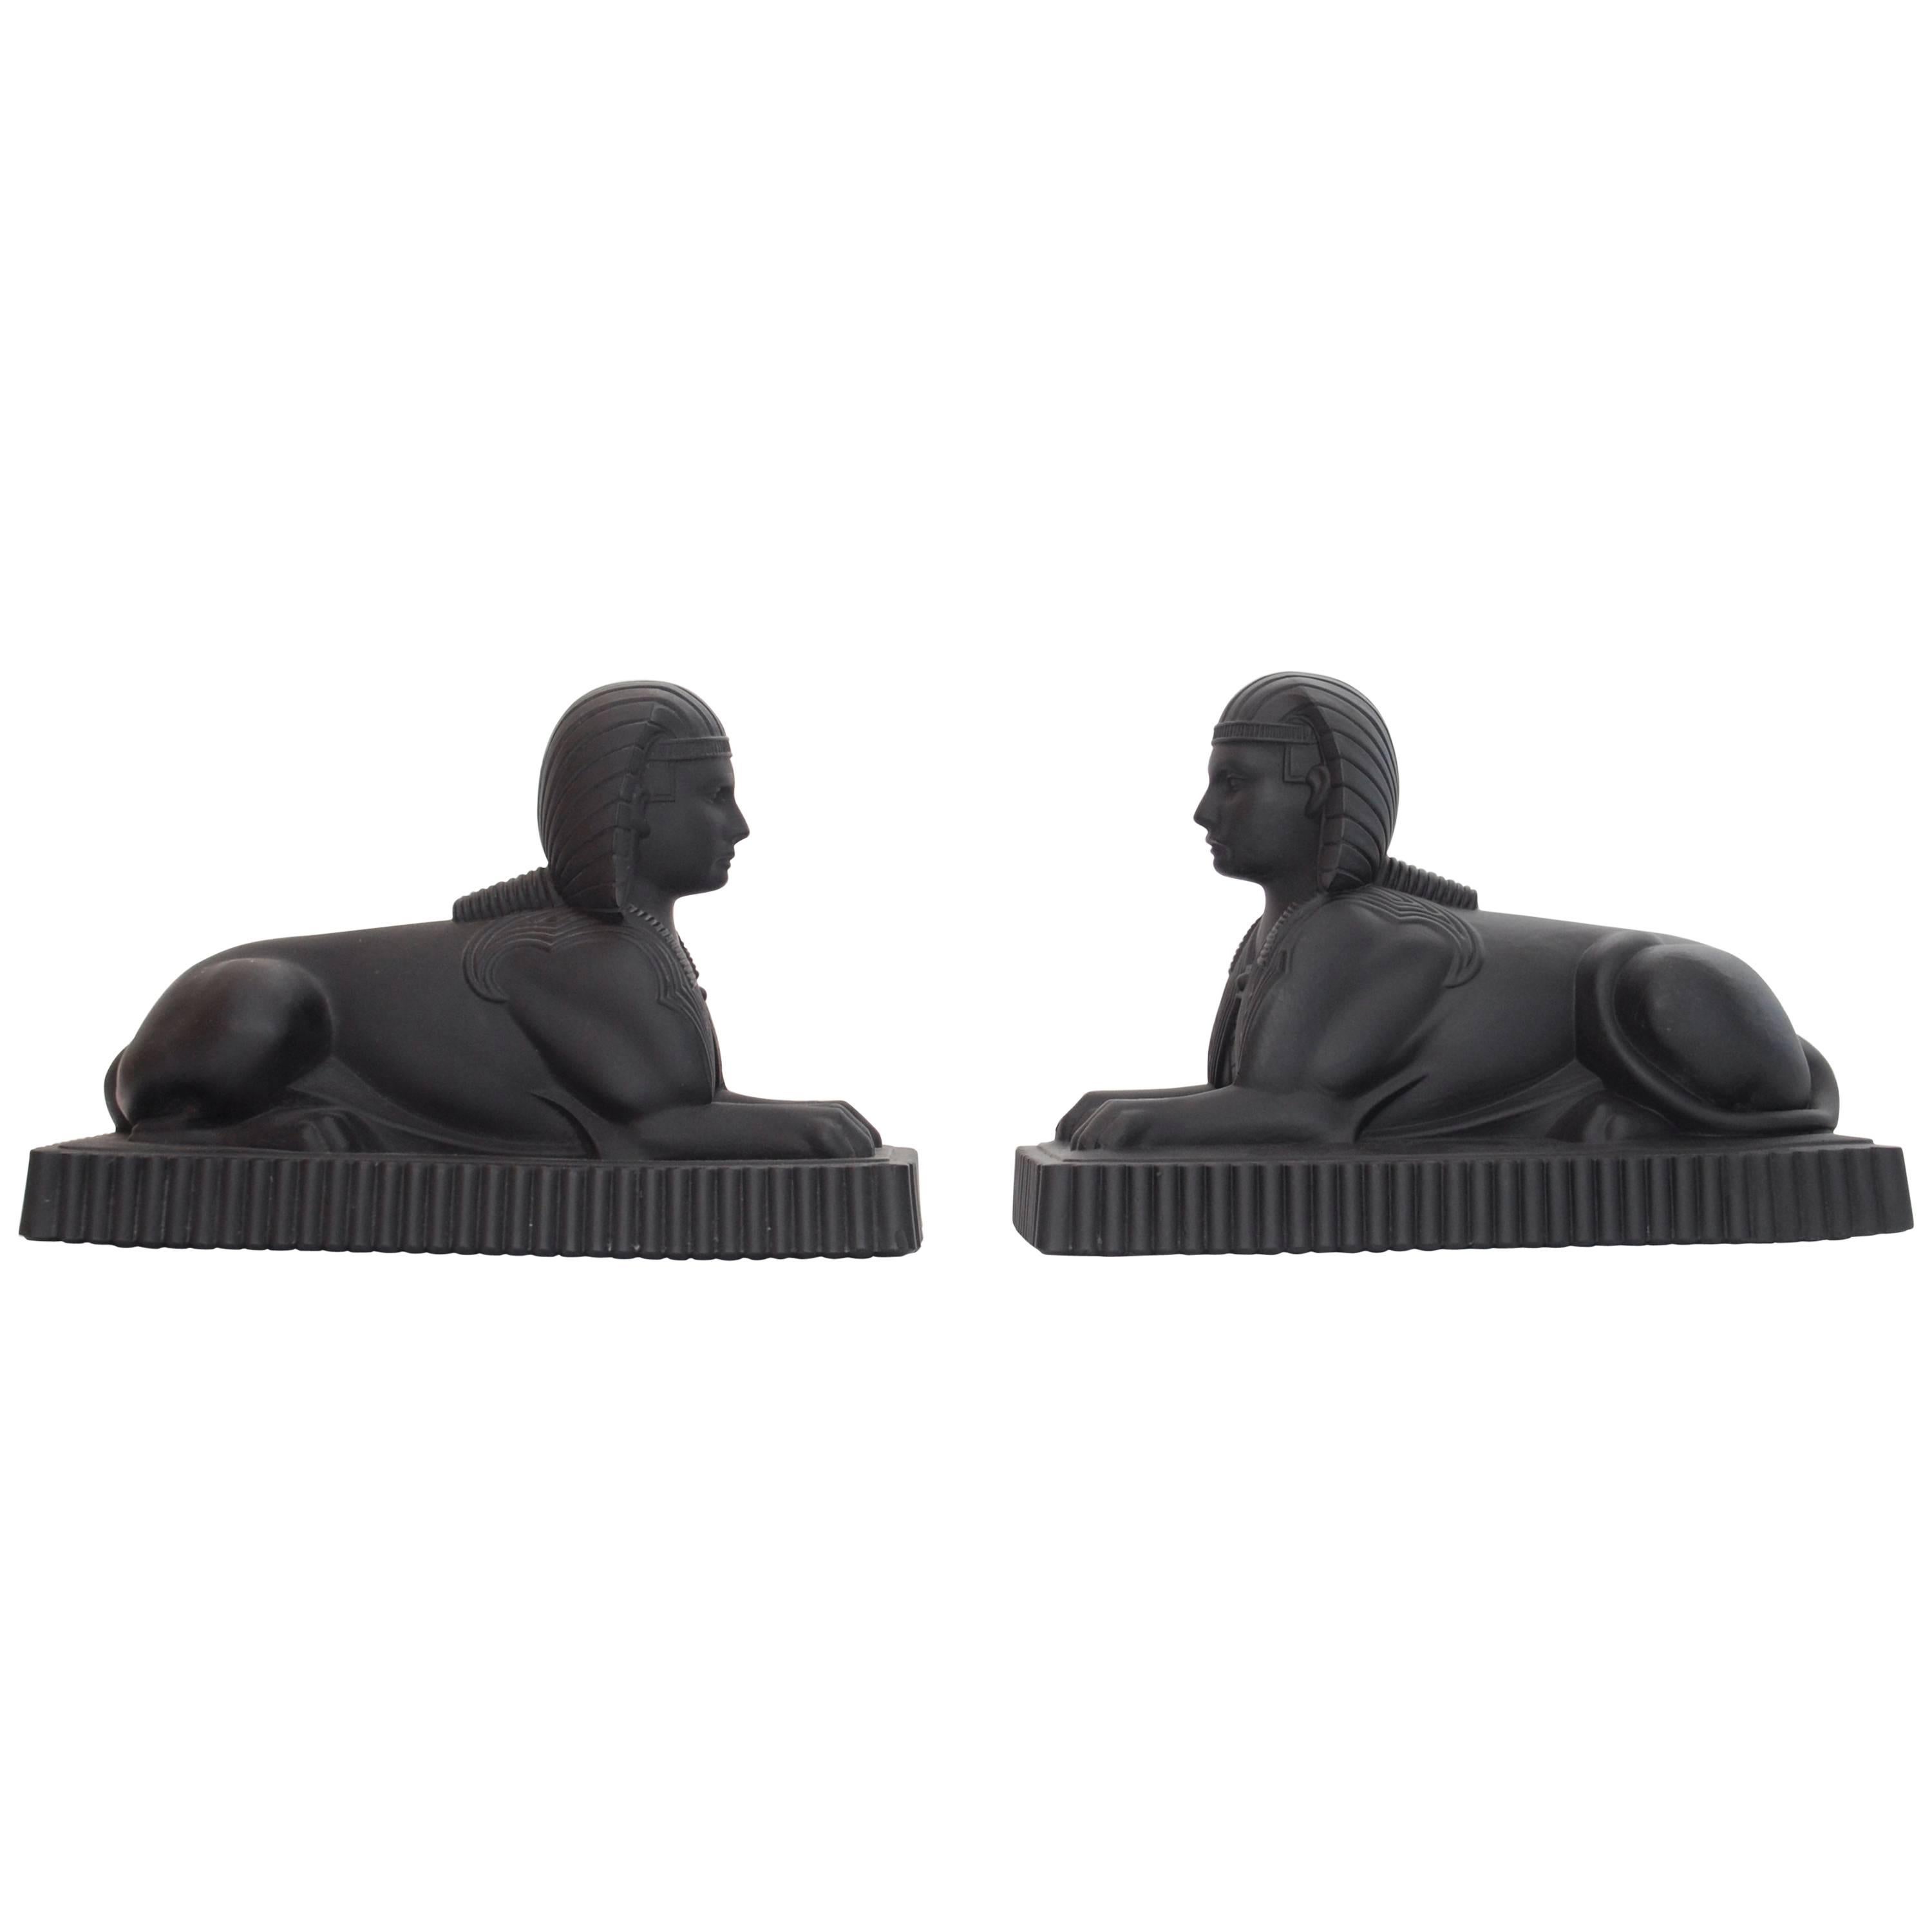 Pair of Black Glass Sphinxes, Molineaux & Webb, circa 1875 For Sale